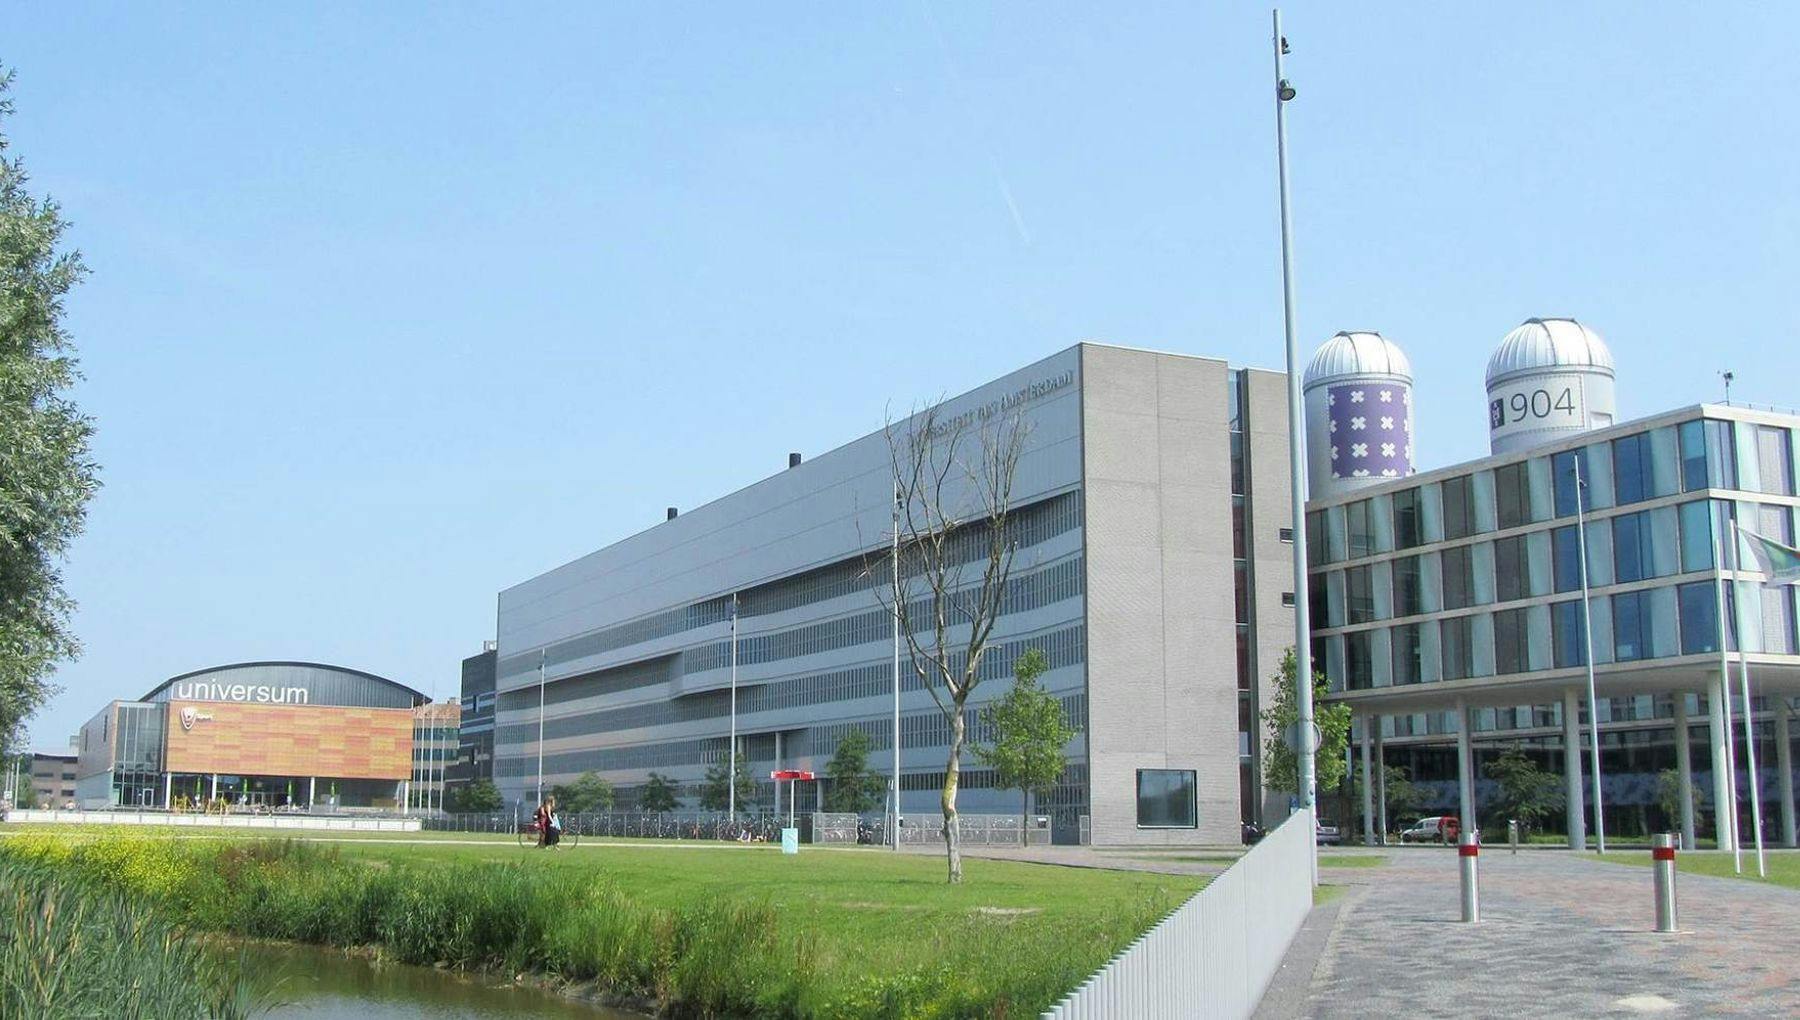 A view of the Amsterdam Science Park